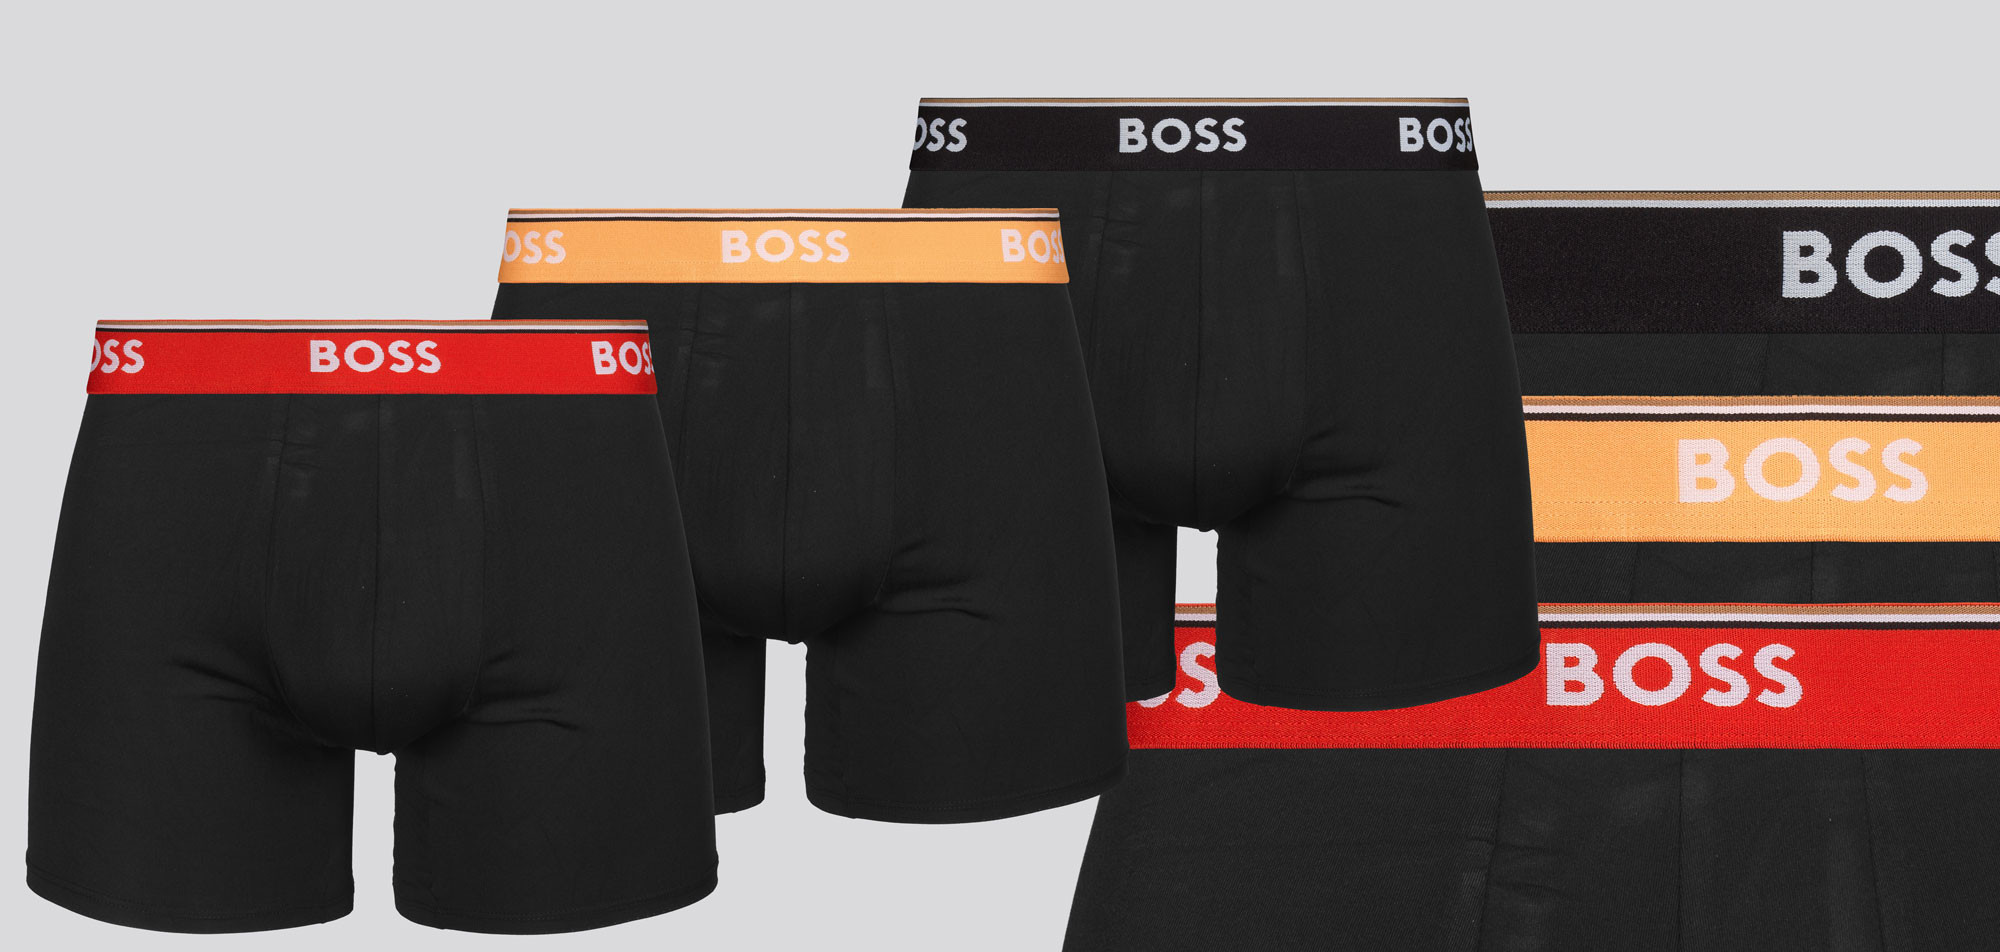 Boss Boxer Brief 3-Pack 926 Power,